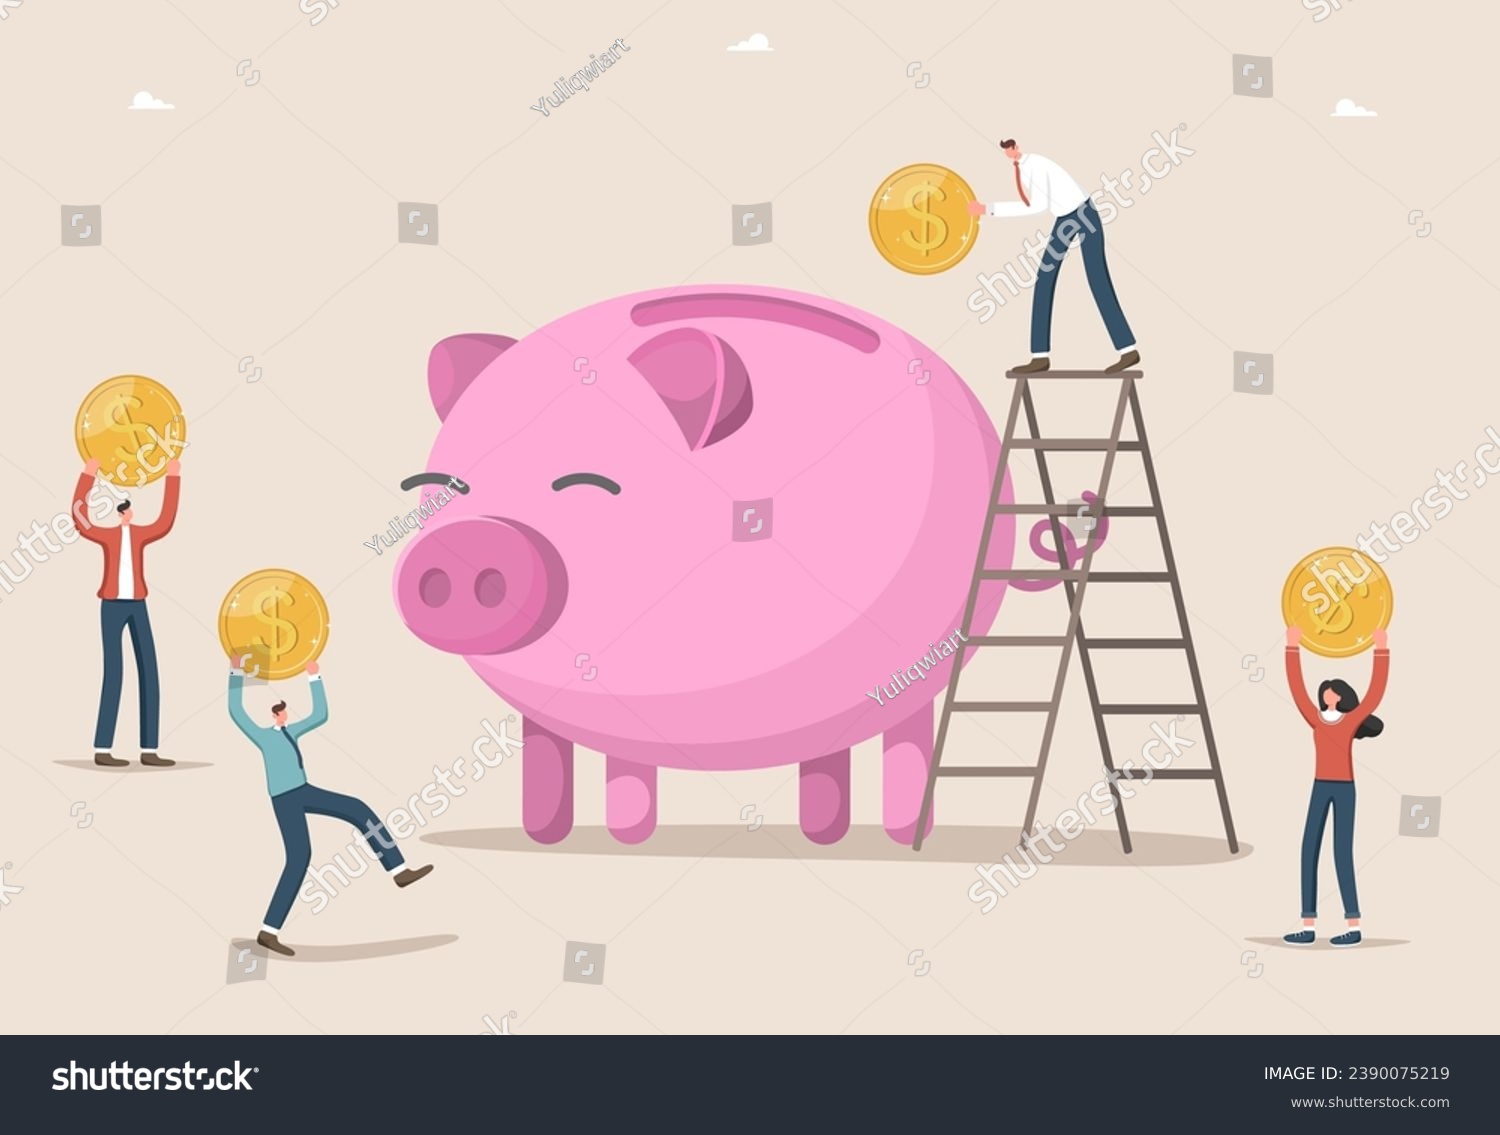 SVG of Income and salary growth, investing assets and money, creating investment portfolio and deposit boxes, managing money, improving the economy and the stock market, people bring coins to the piggy bank. svg